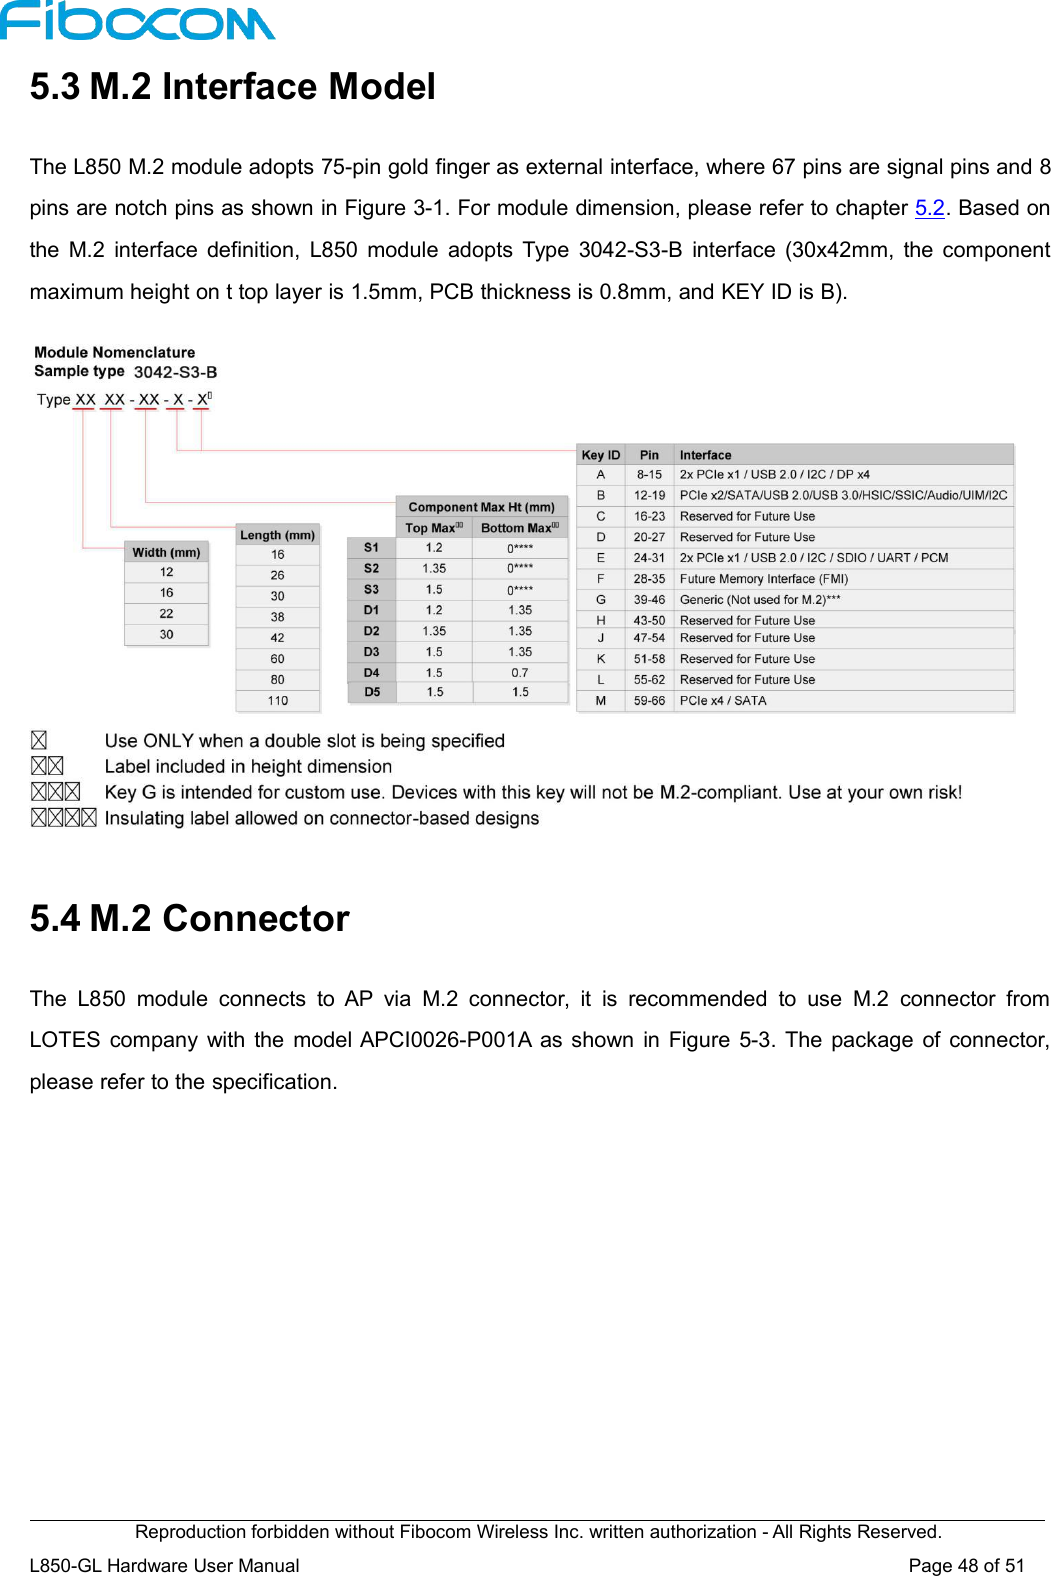 Reproduction forbidden without Fibocom Wireless Inc. written authorization - All Rights Reserved.L850-GL Hardware User Manual Page48of515.3 M.2 Interface ModelThe L850 M.2 module adopts 75-pin gold finger as external interface, where 67 pins are signal pins and 8pins are notch pins as shown in Figure 3-1. For module dimension, please refer to chapter 5.2. Based onthe M.2 interface definition, L850 module adopts Type 3042-S3-B interface (30x42mm, the componentmaximum height on t top layer is 1.5mm, PCB thickness is 0.8mm, and KEY ID is B).5.4 M.2 ConnectorThe L850 module connects to AP via M.2 connector, it is recommended to use M.2 connector fromLOTES company with the model APCI0026-P001A as shown in Figure 5-3. The package of connector,please refer to the specification.